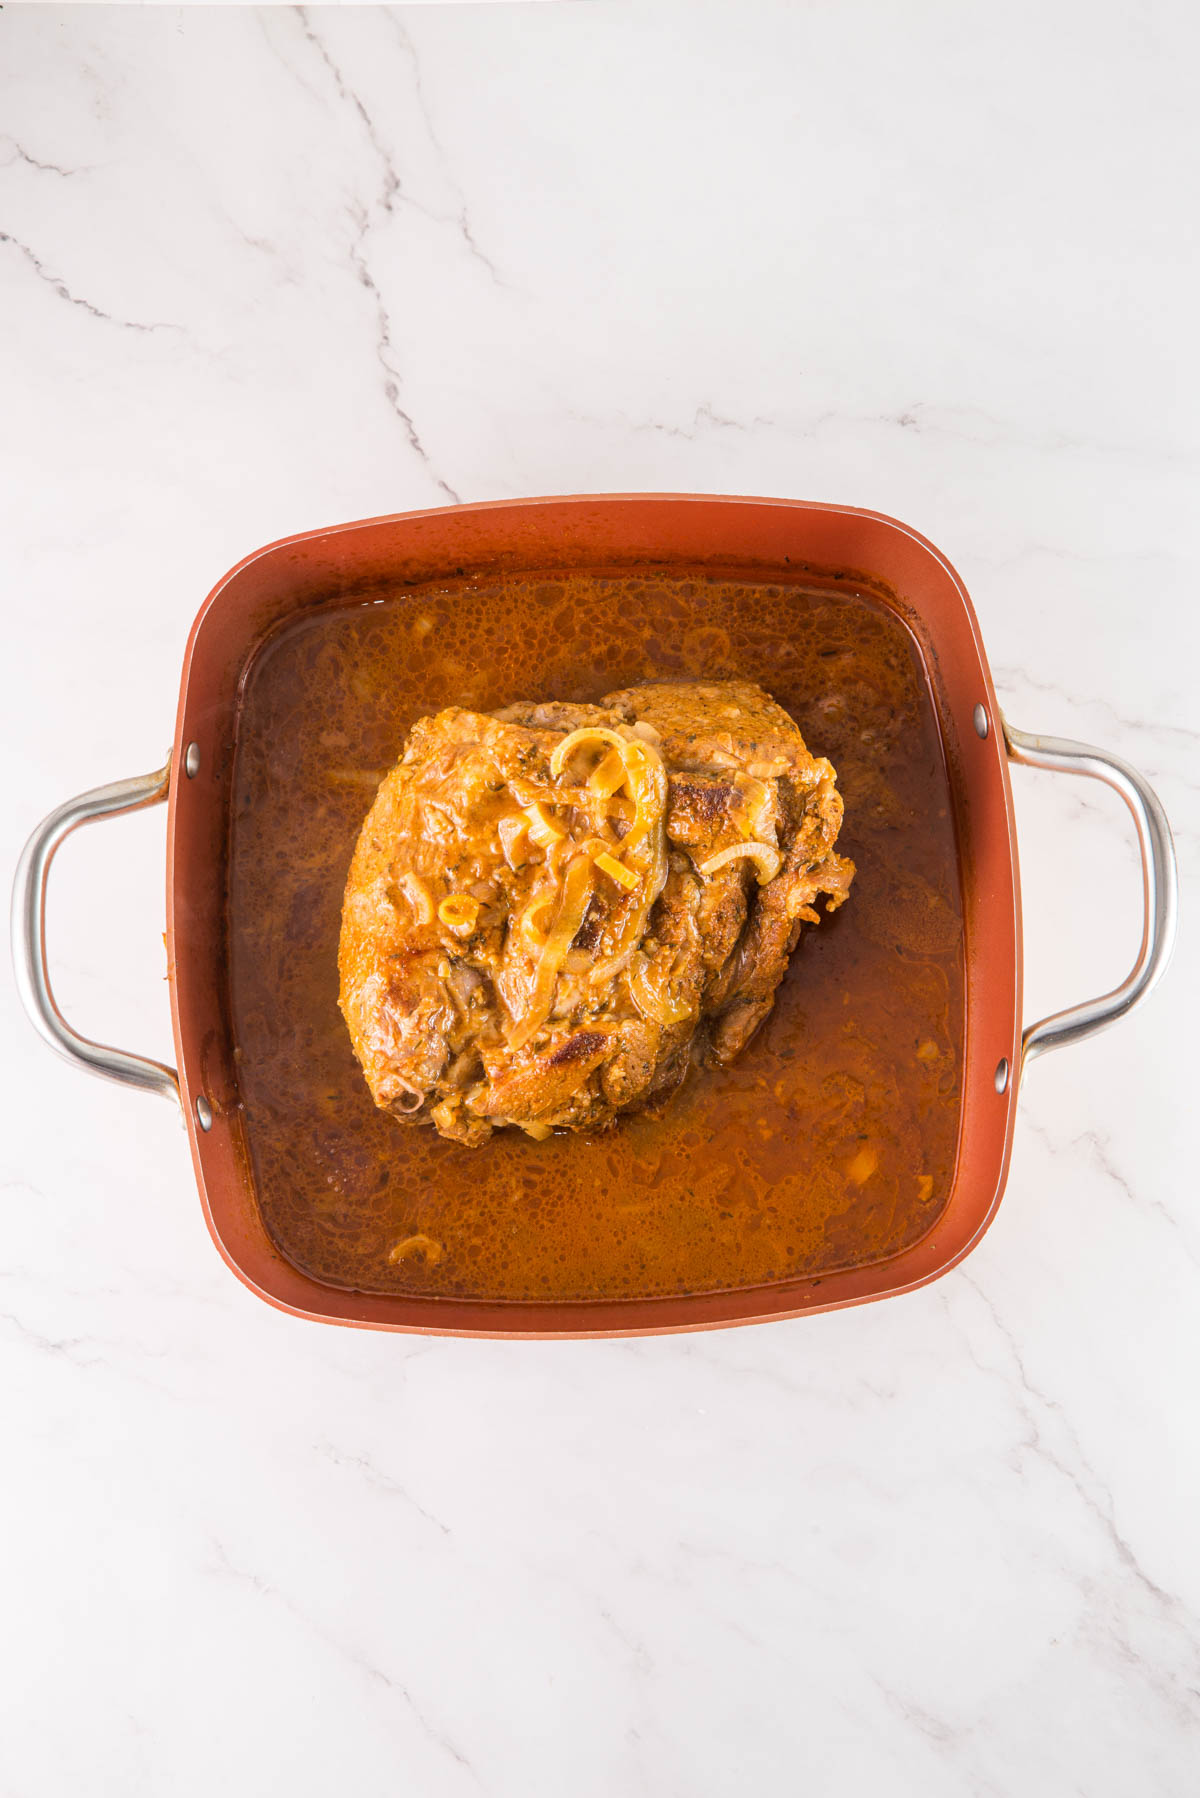 Pork in a red baking dish on a marble countertop.